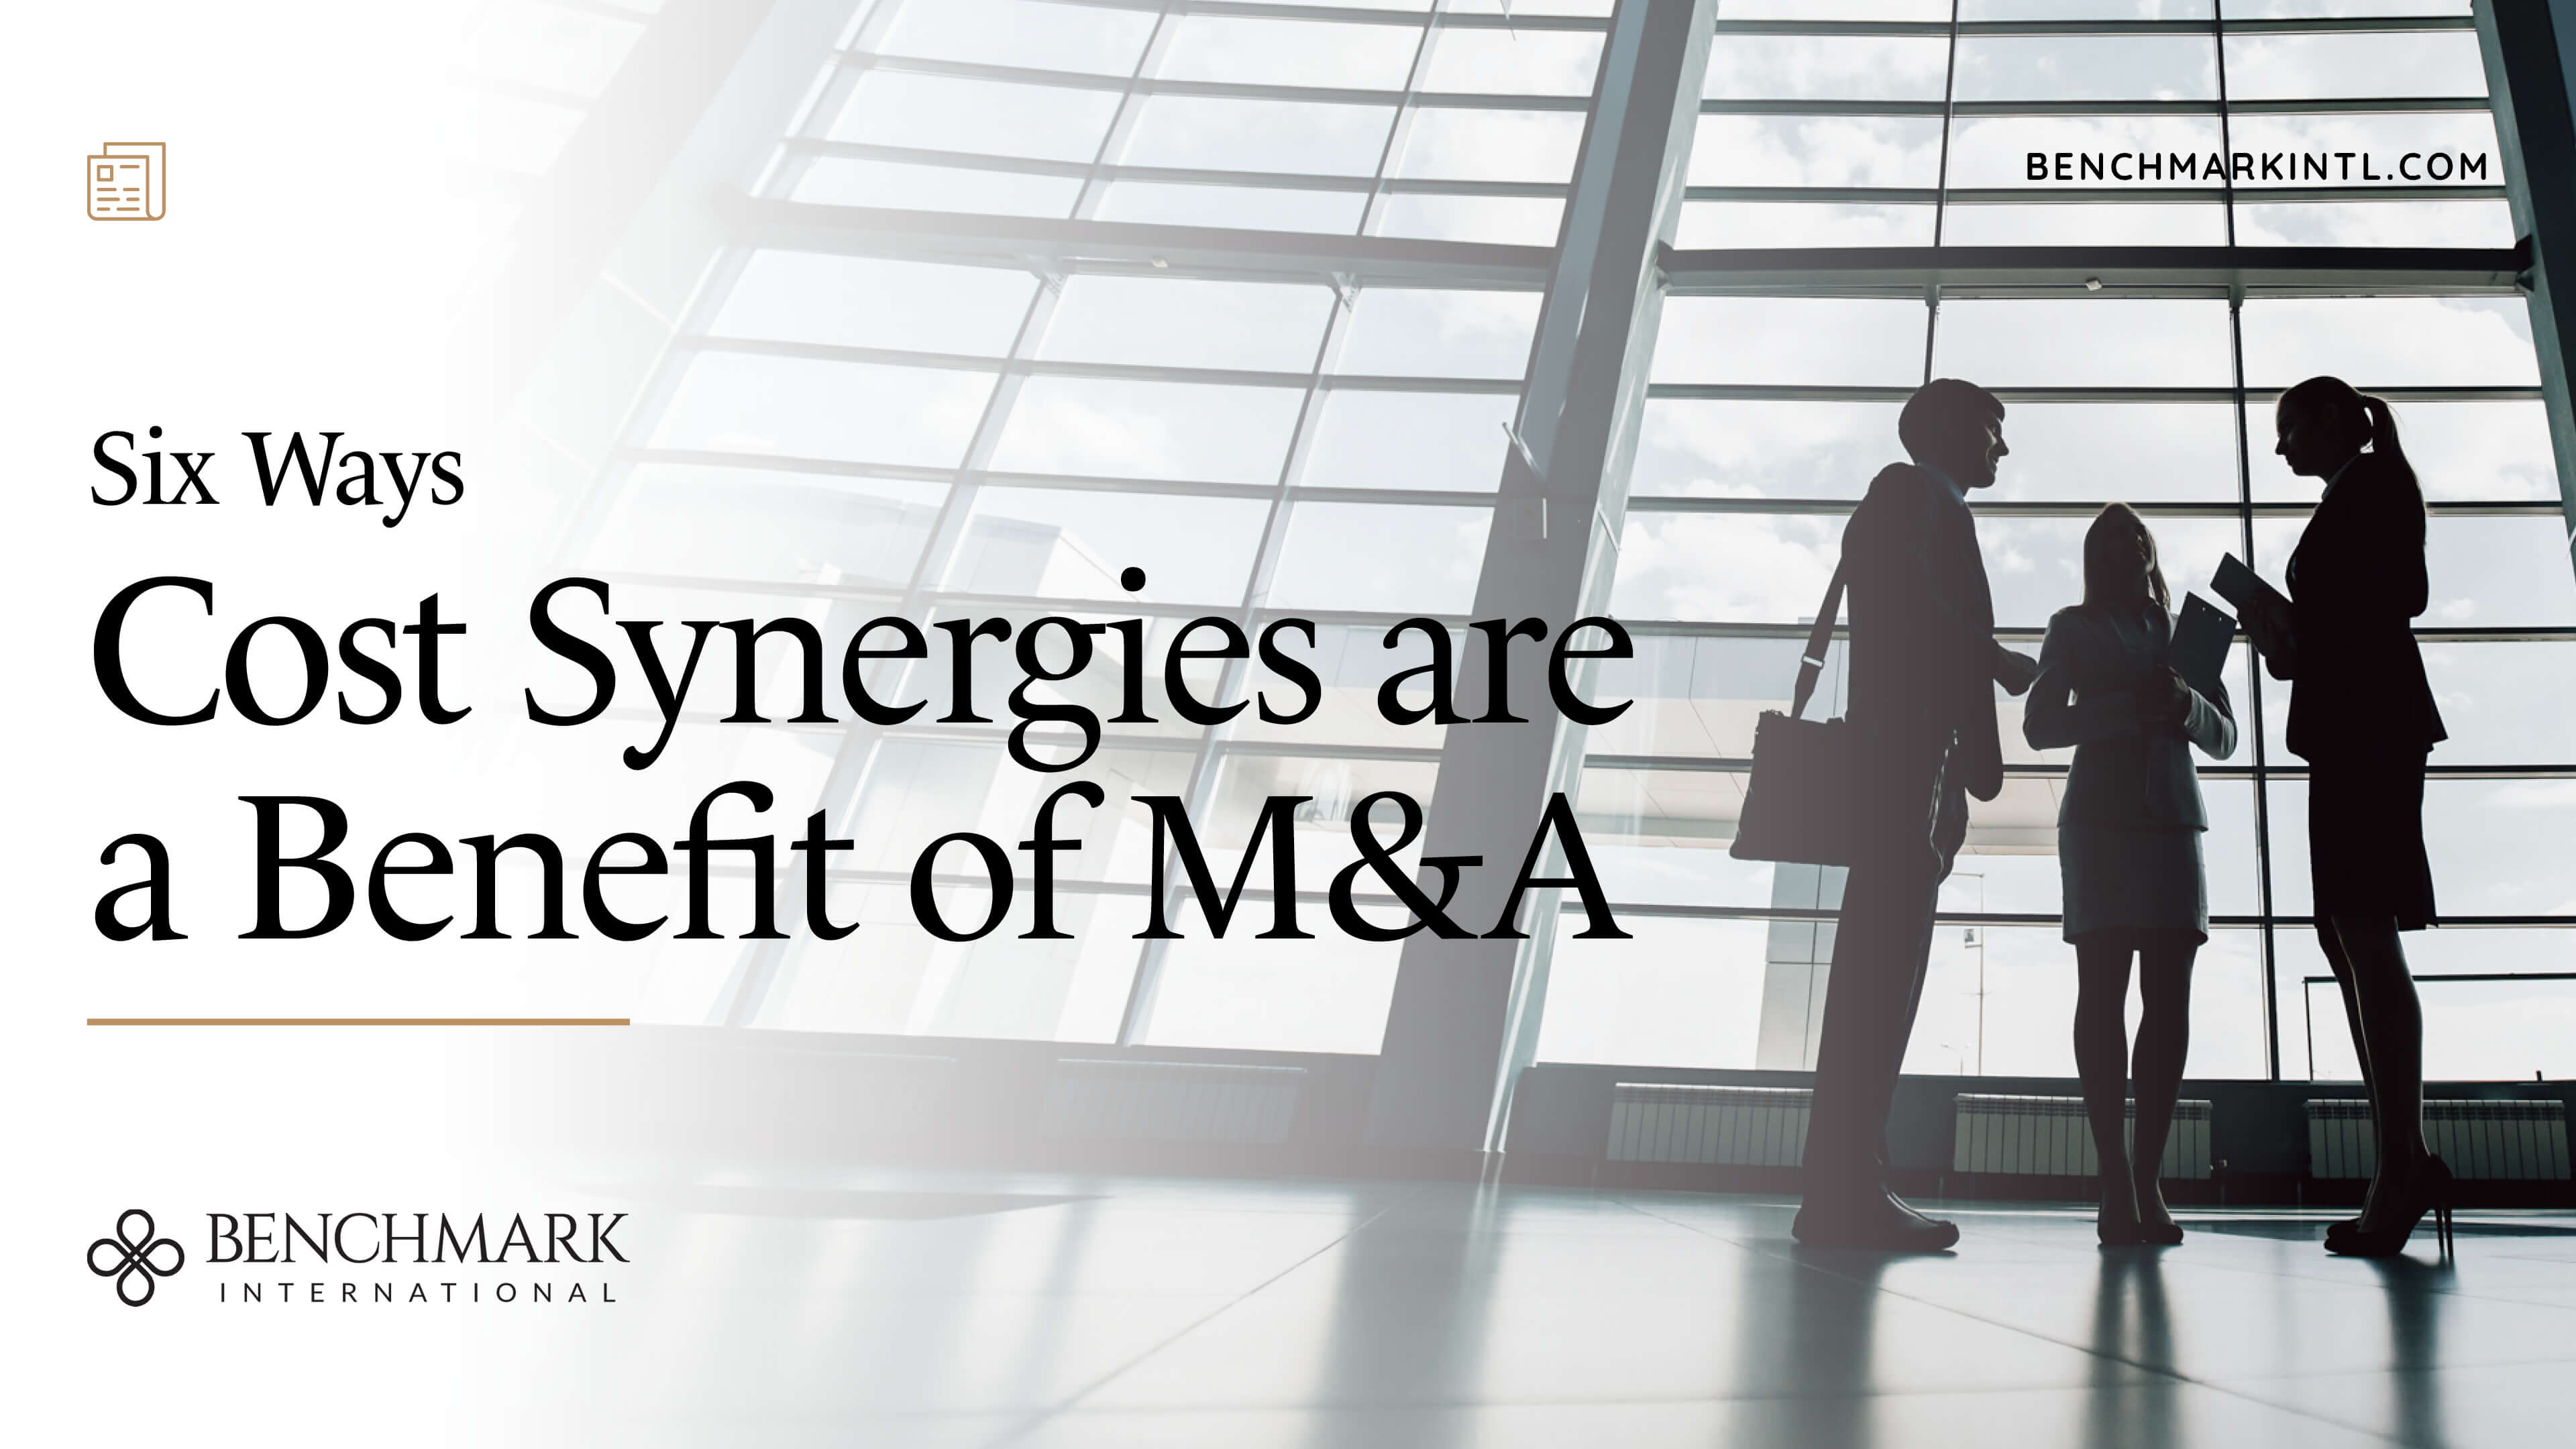 Six Ways Cost Synergies Are A Benefit Of M&A